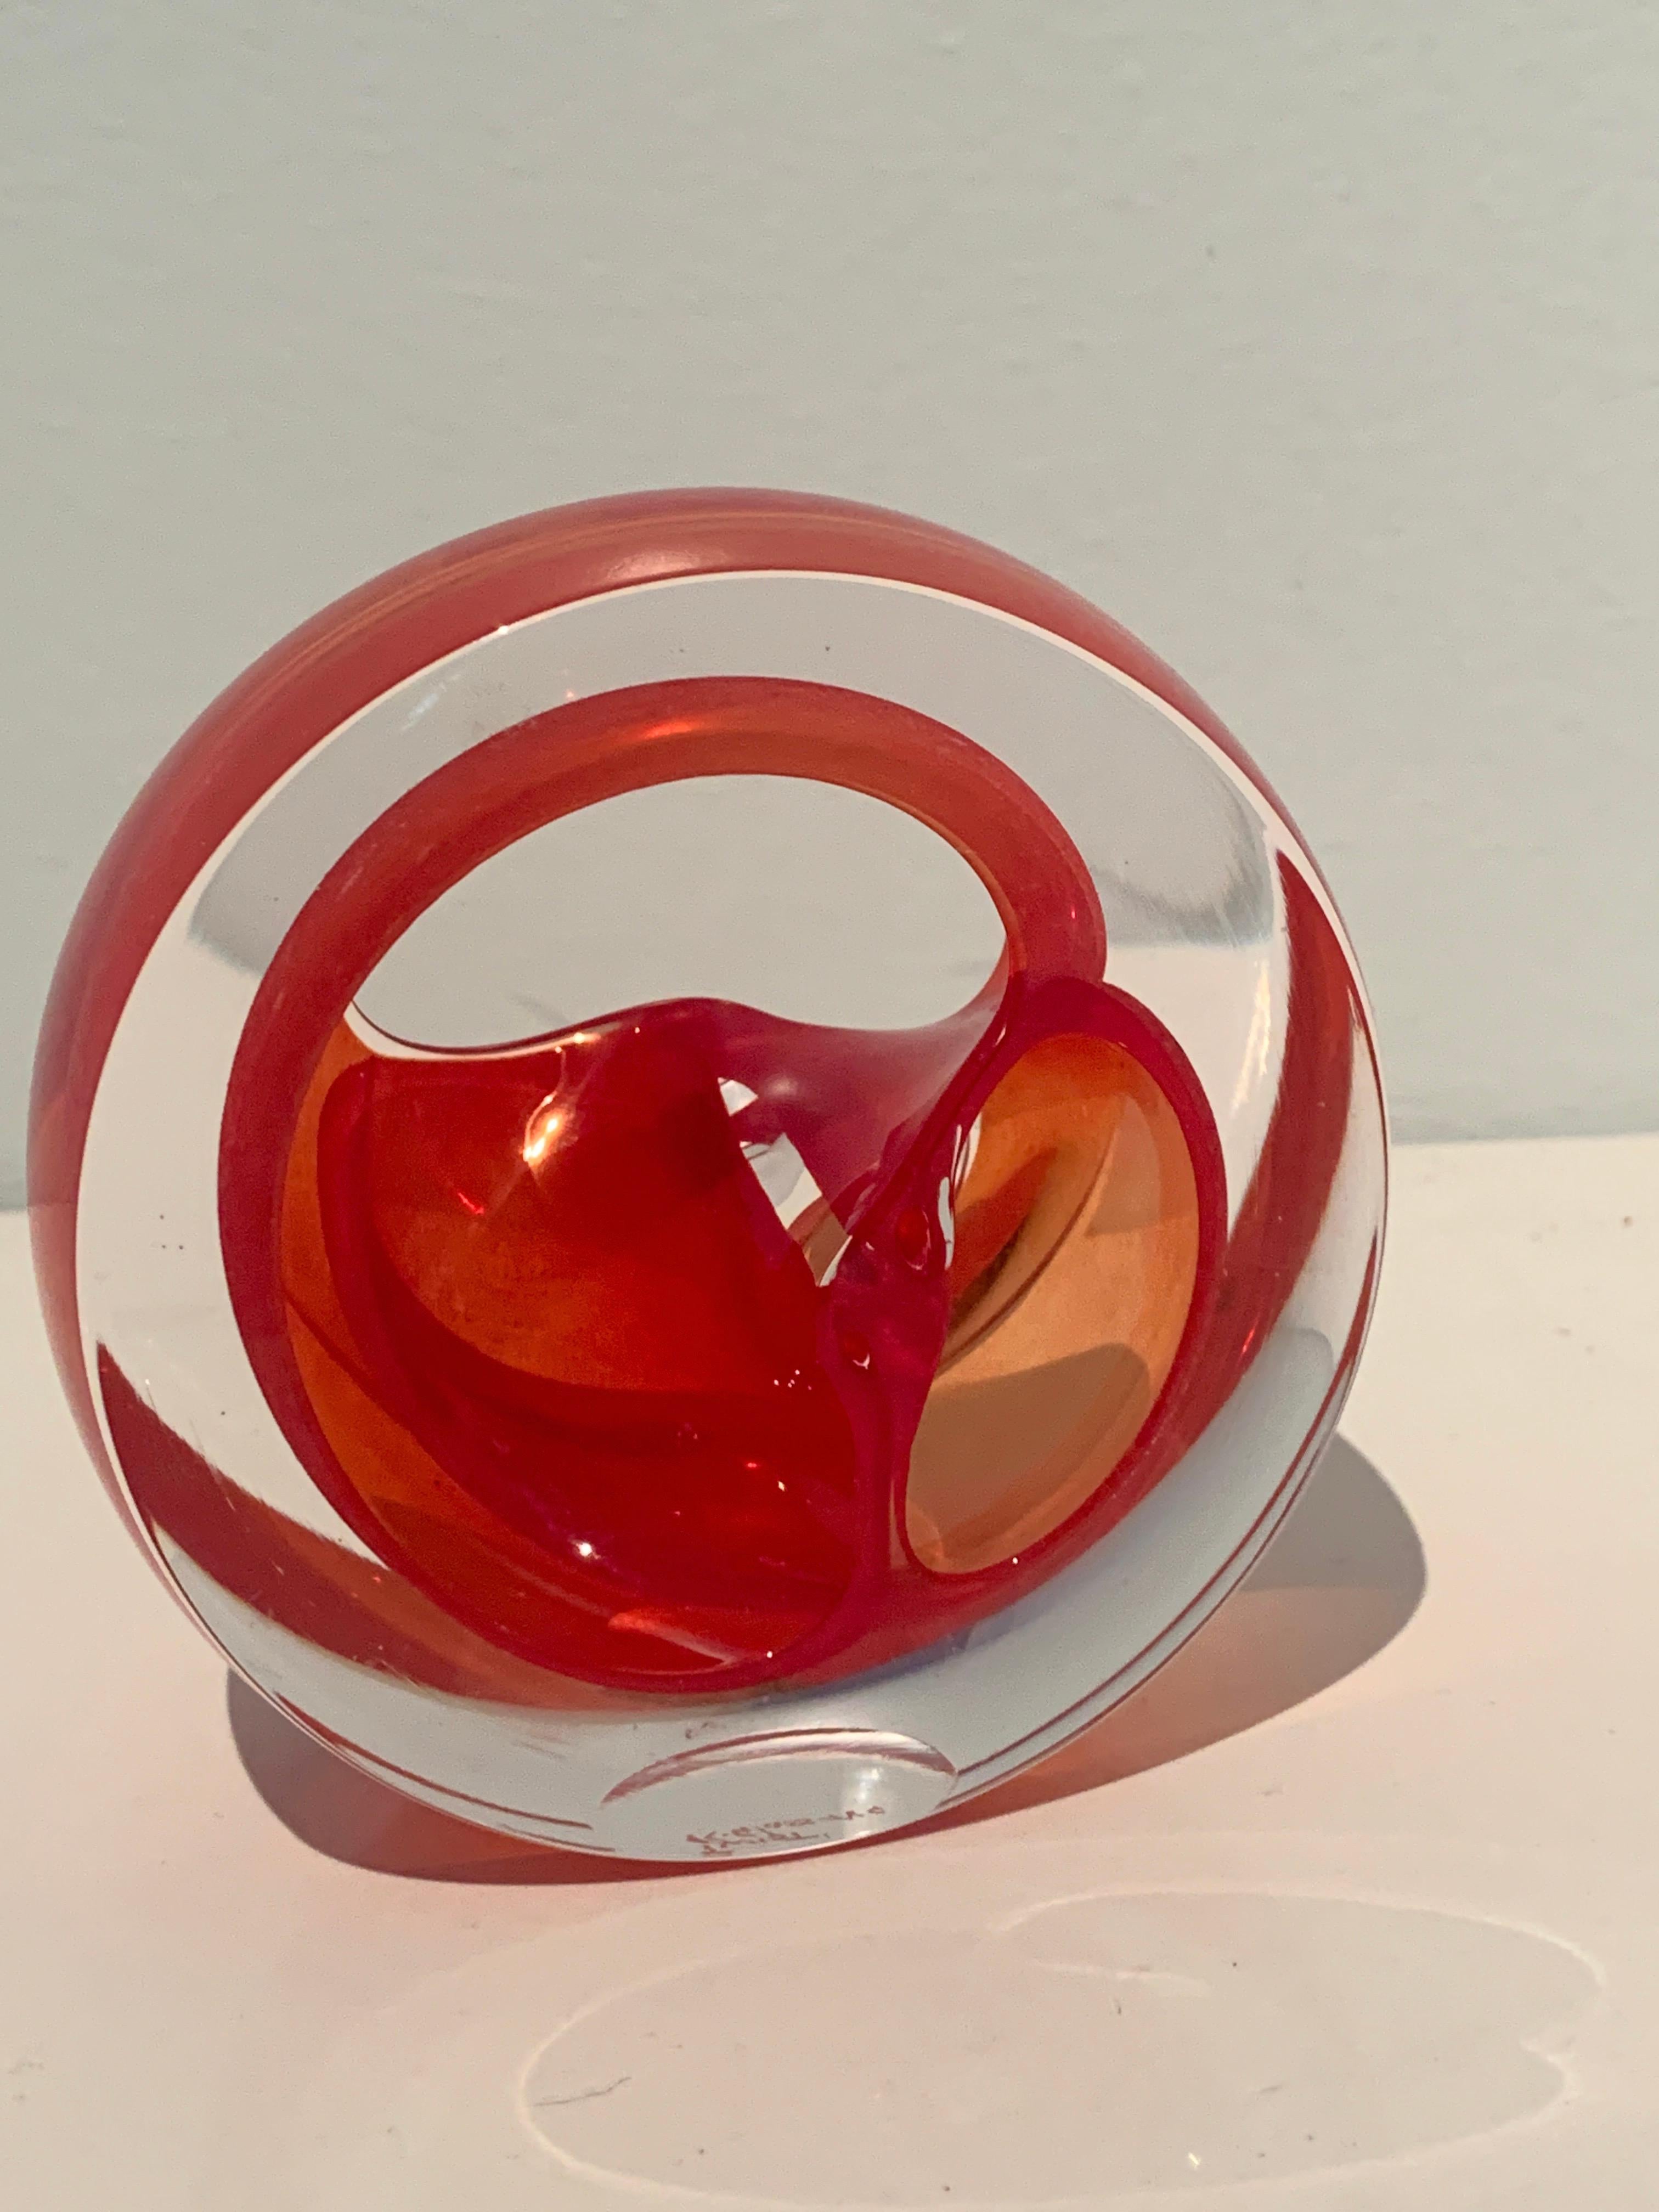 English Teign Valley Red Art Glass Sculpture Paper Weight Bookend In Good Condition For Sale In Los Angeles, CA